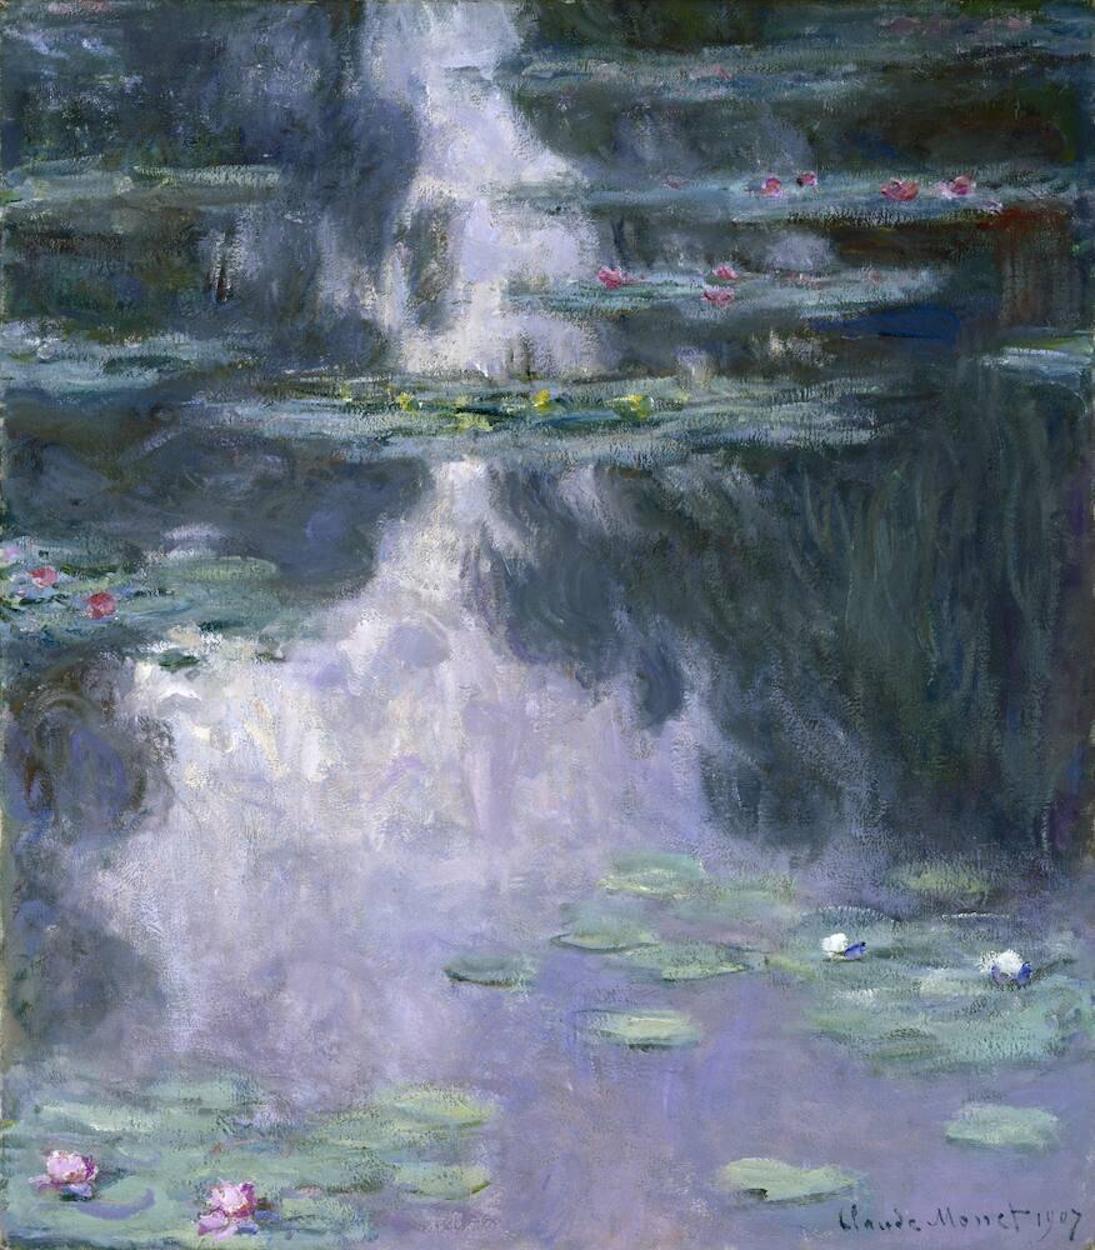 Water Lilies by Claude Monet - 1907 - 92.1 × 81.2 cm Museum of Fine Arts